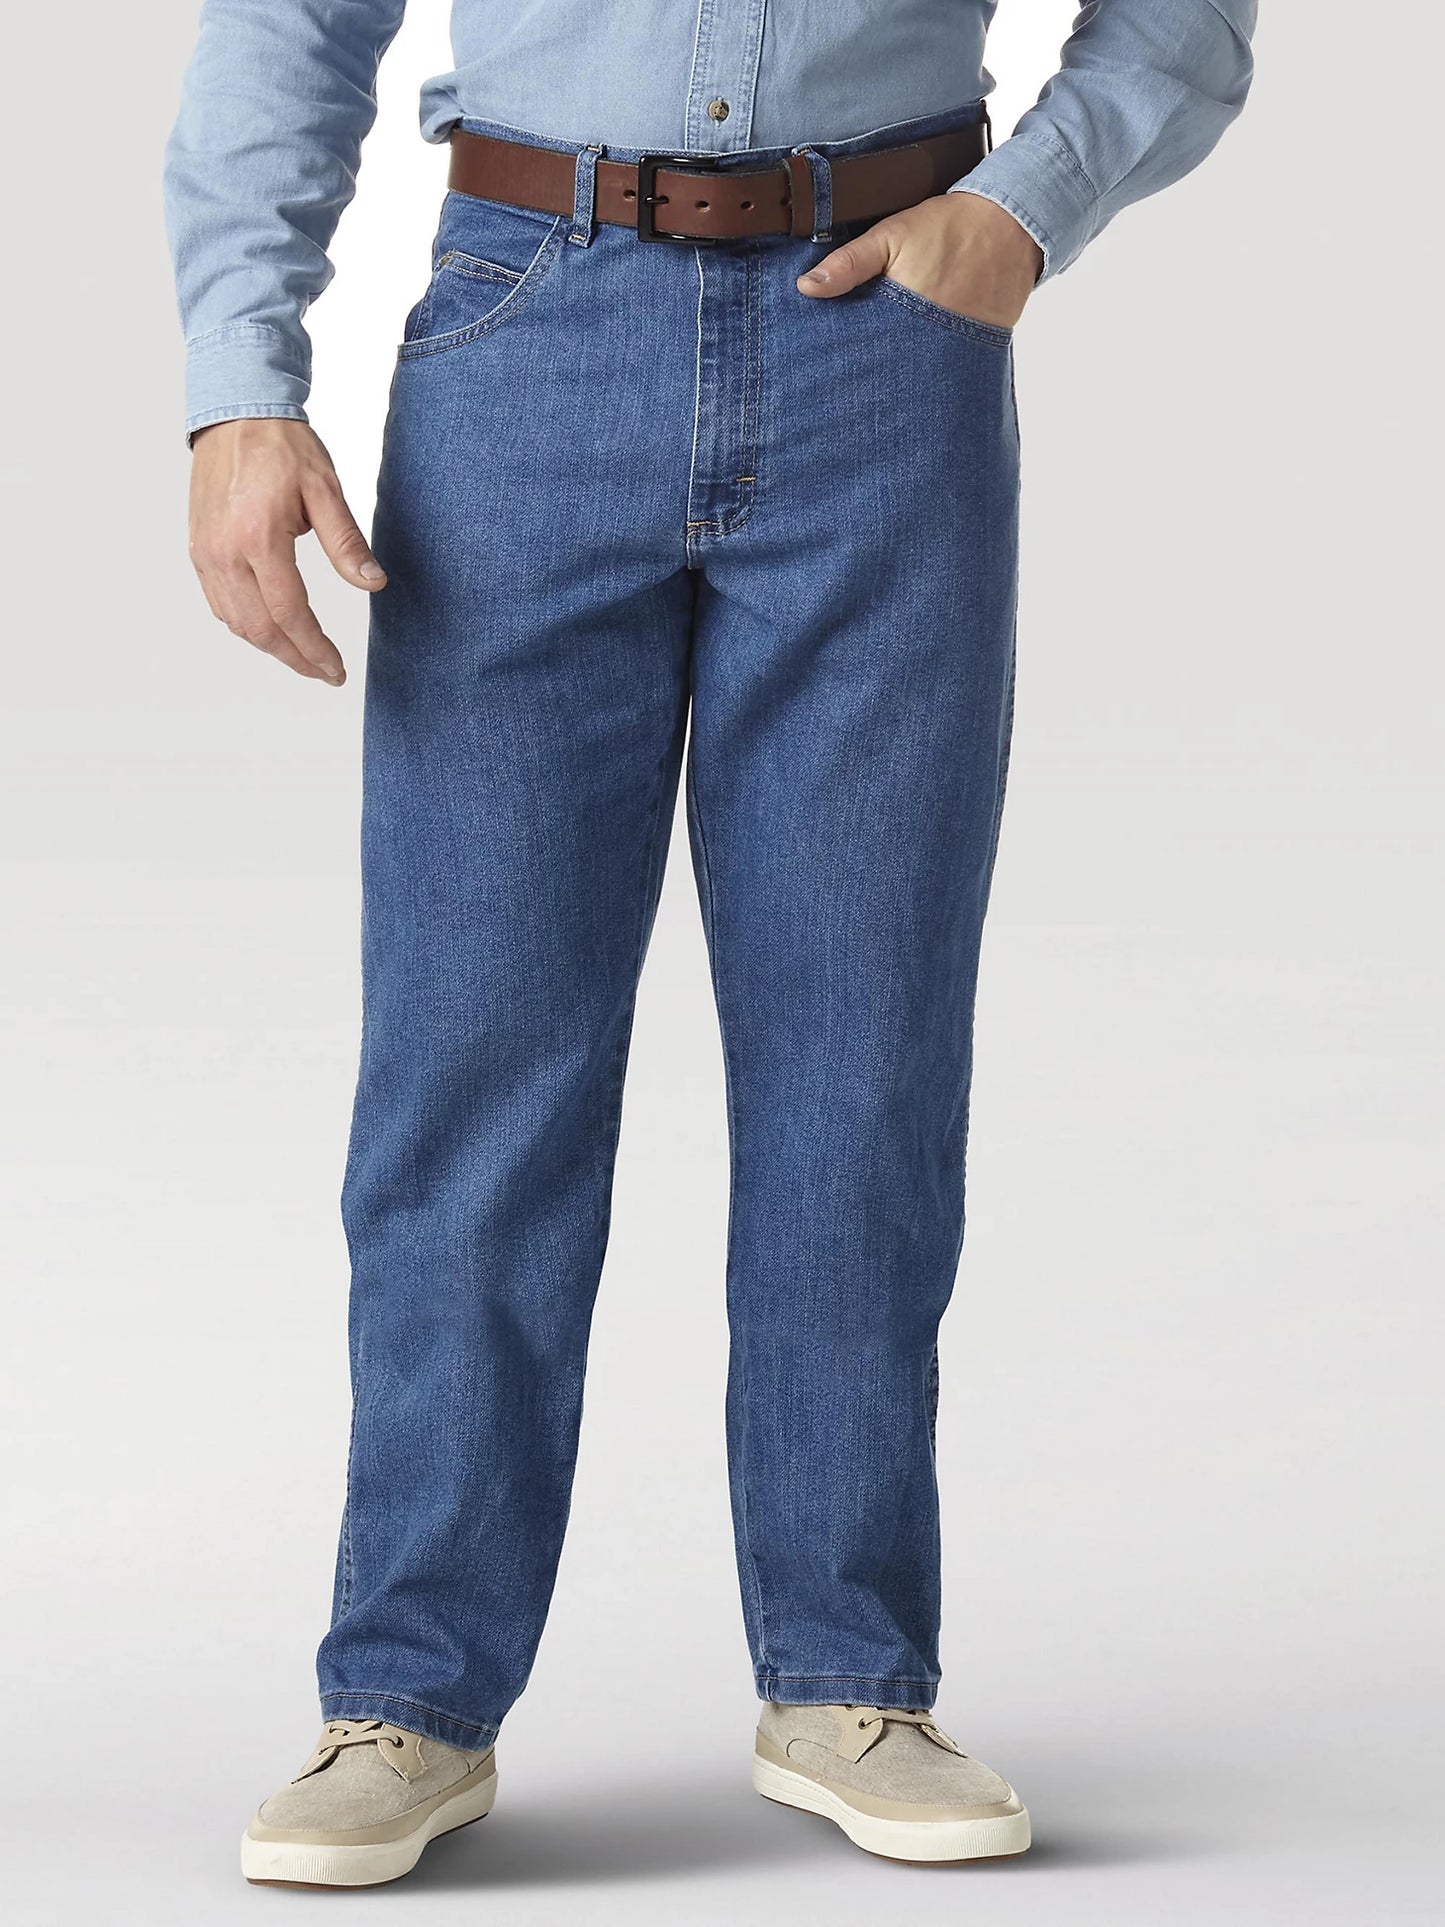 Men's Wrangler Relaxed Fit Stretch Jean